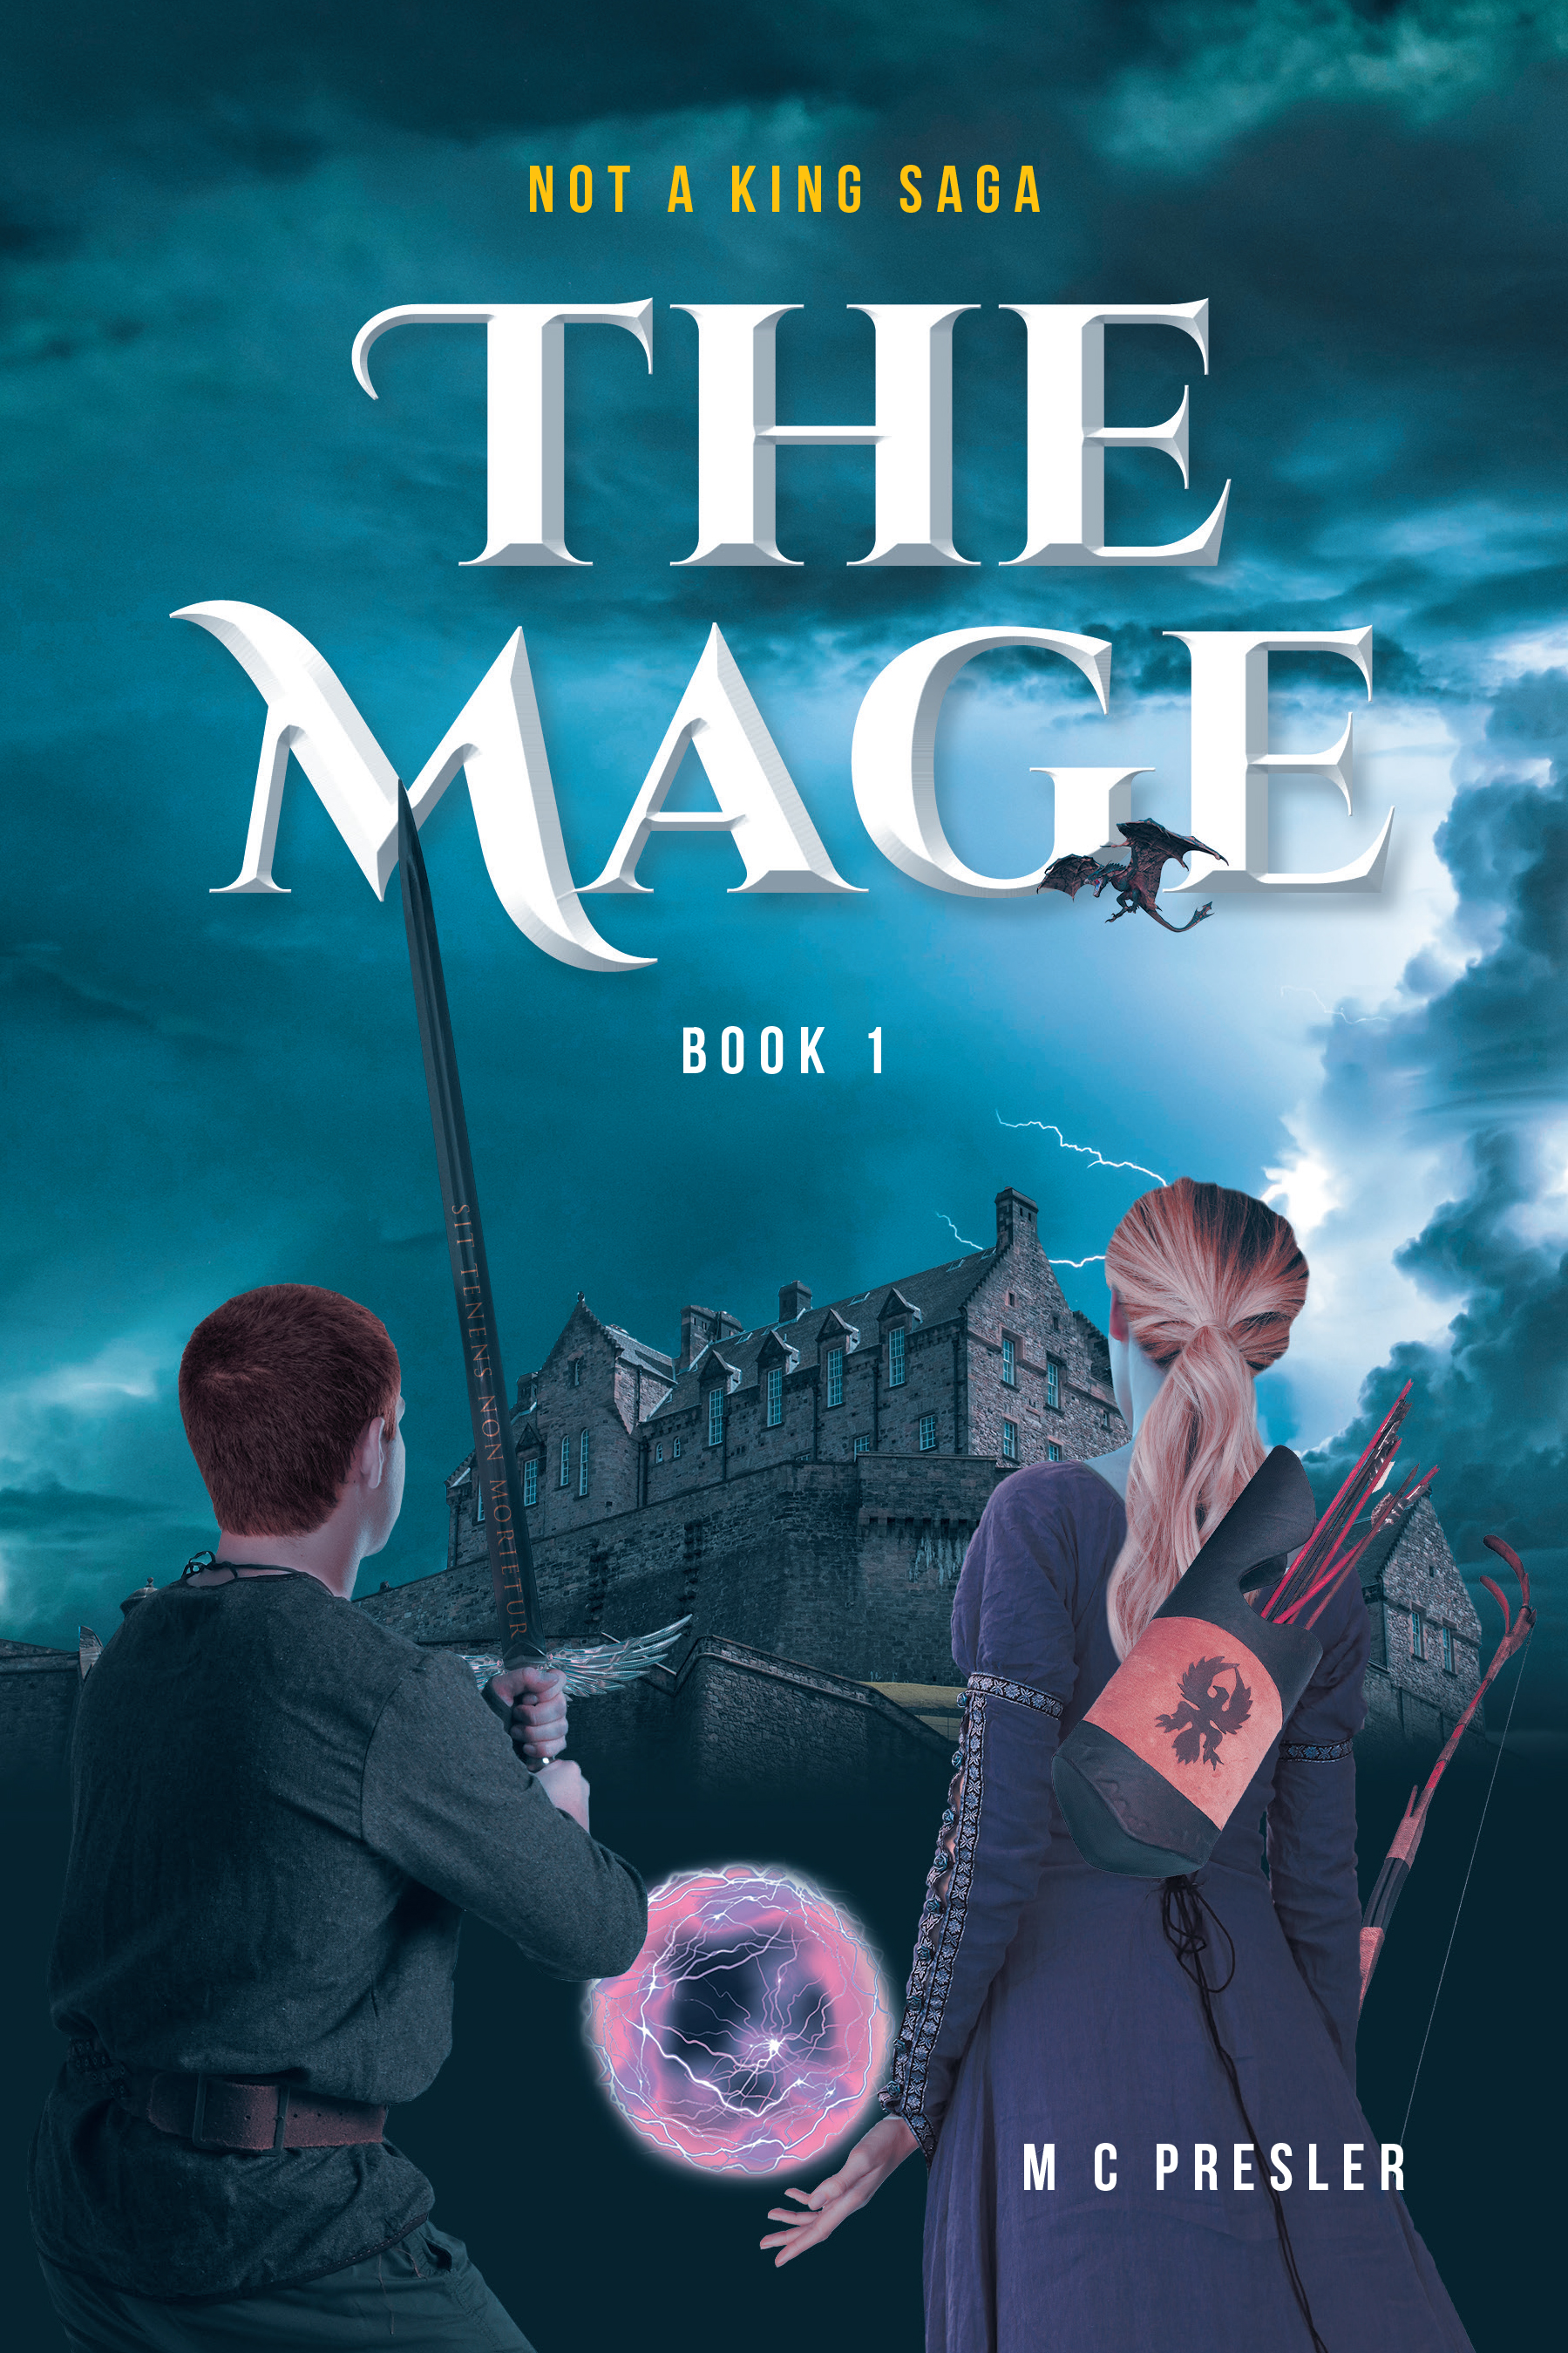 M C Presler’s New Book, "The Mage Book 1," Follows a Young Girl’s Journey to Survive and Follow Her Destiny After Discovering She Has Powerful, But Illegal, Mage Blood